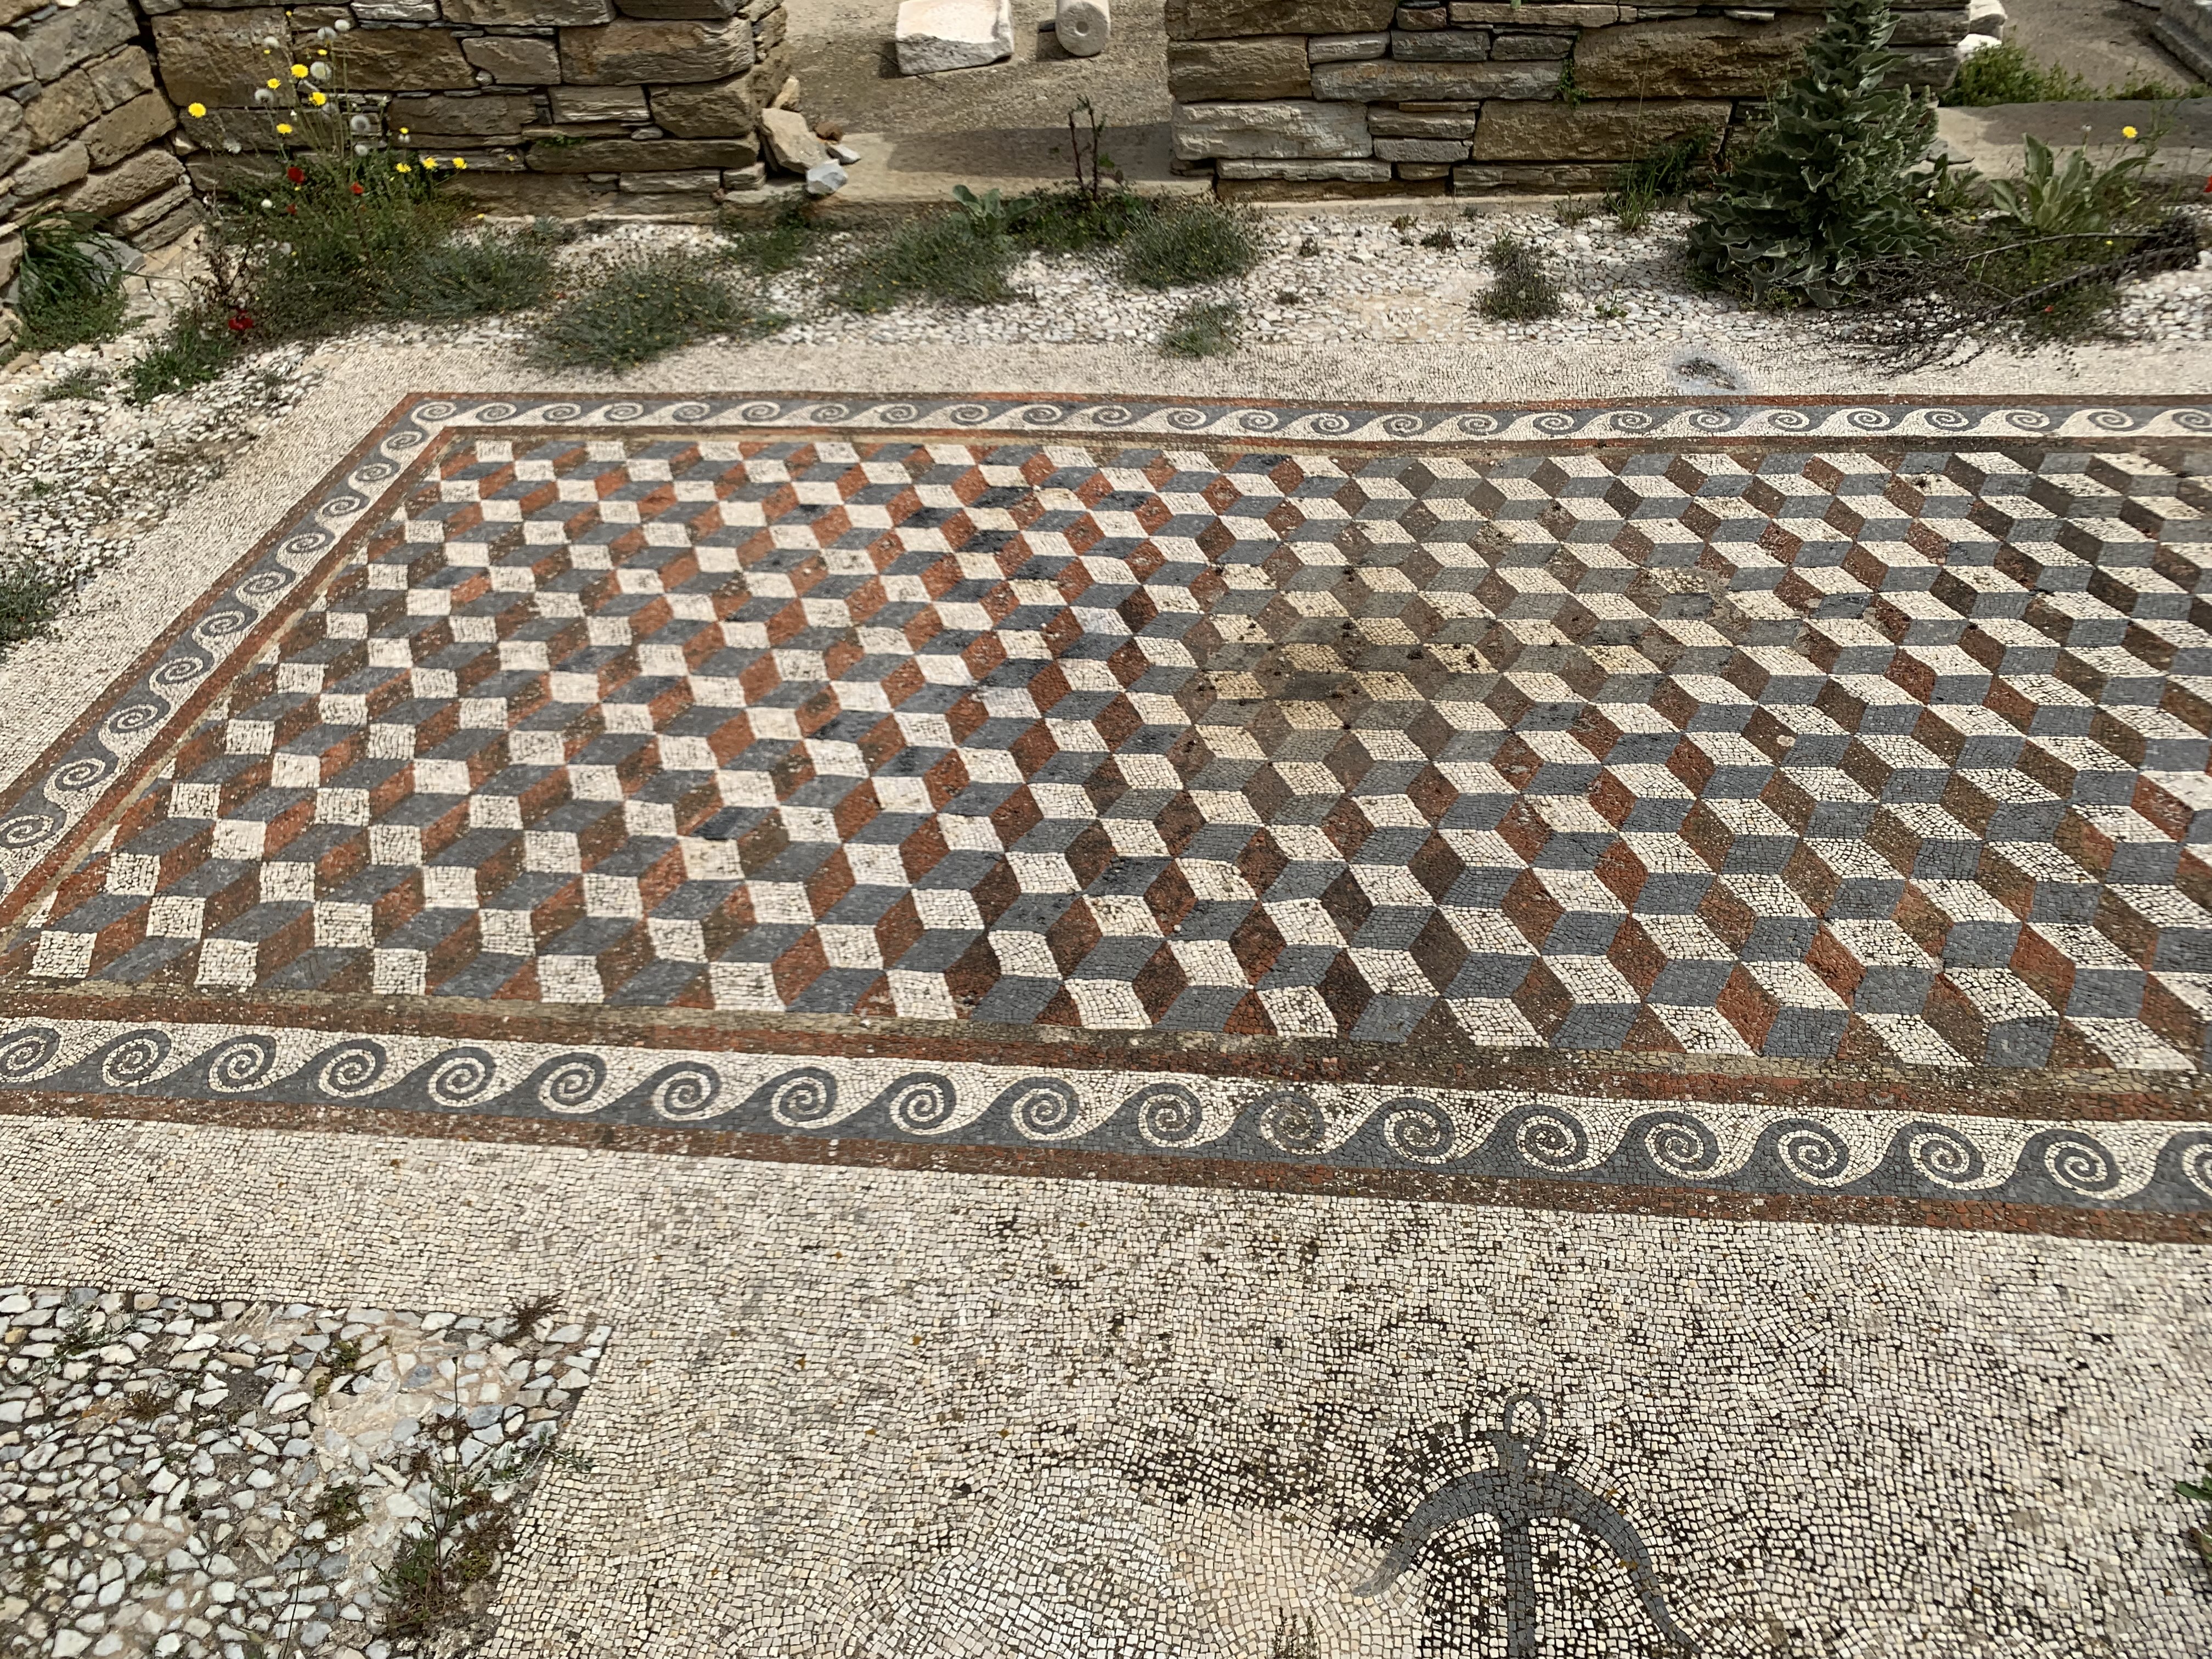 A floor mosaic from Delos showing reversible cubes.